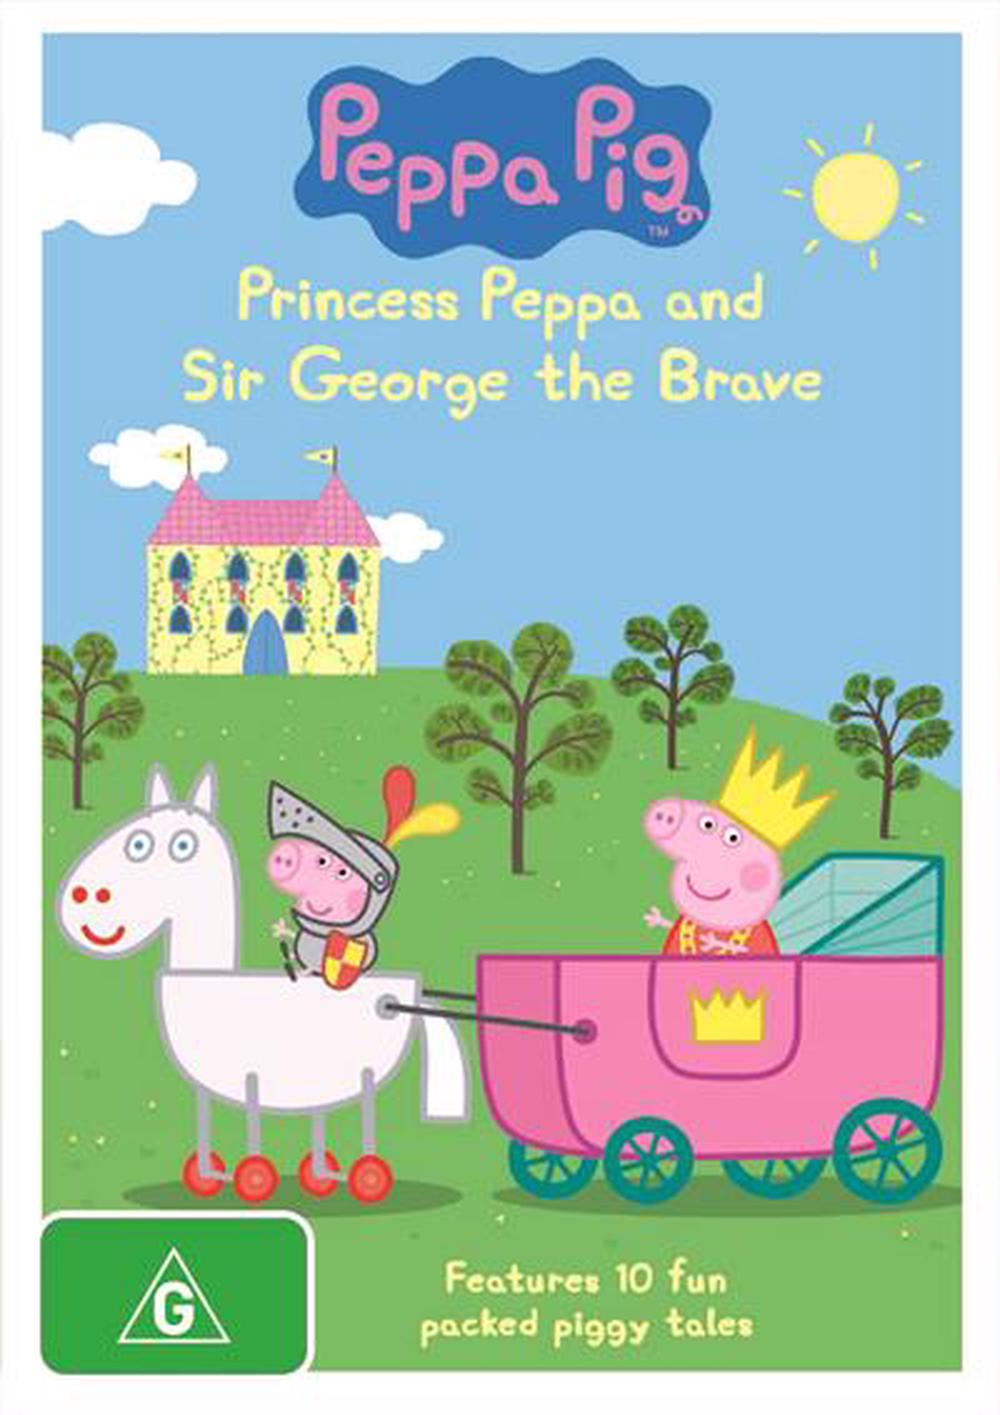 Peppa Pig Dvd Buy Online At The Nile